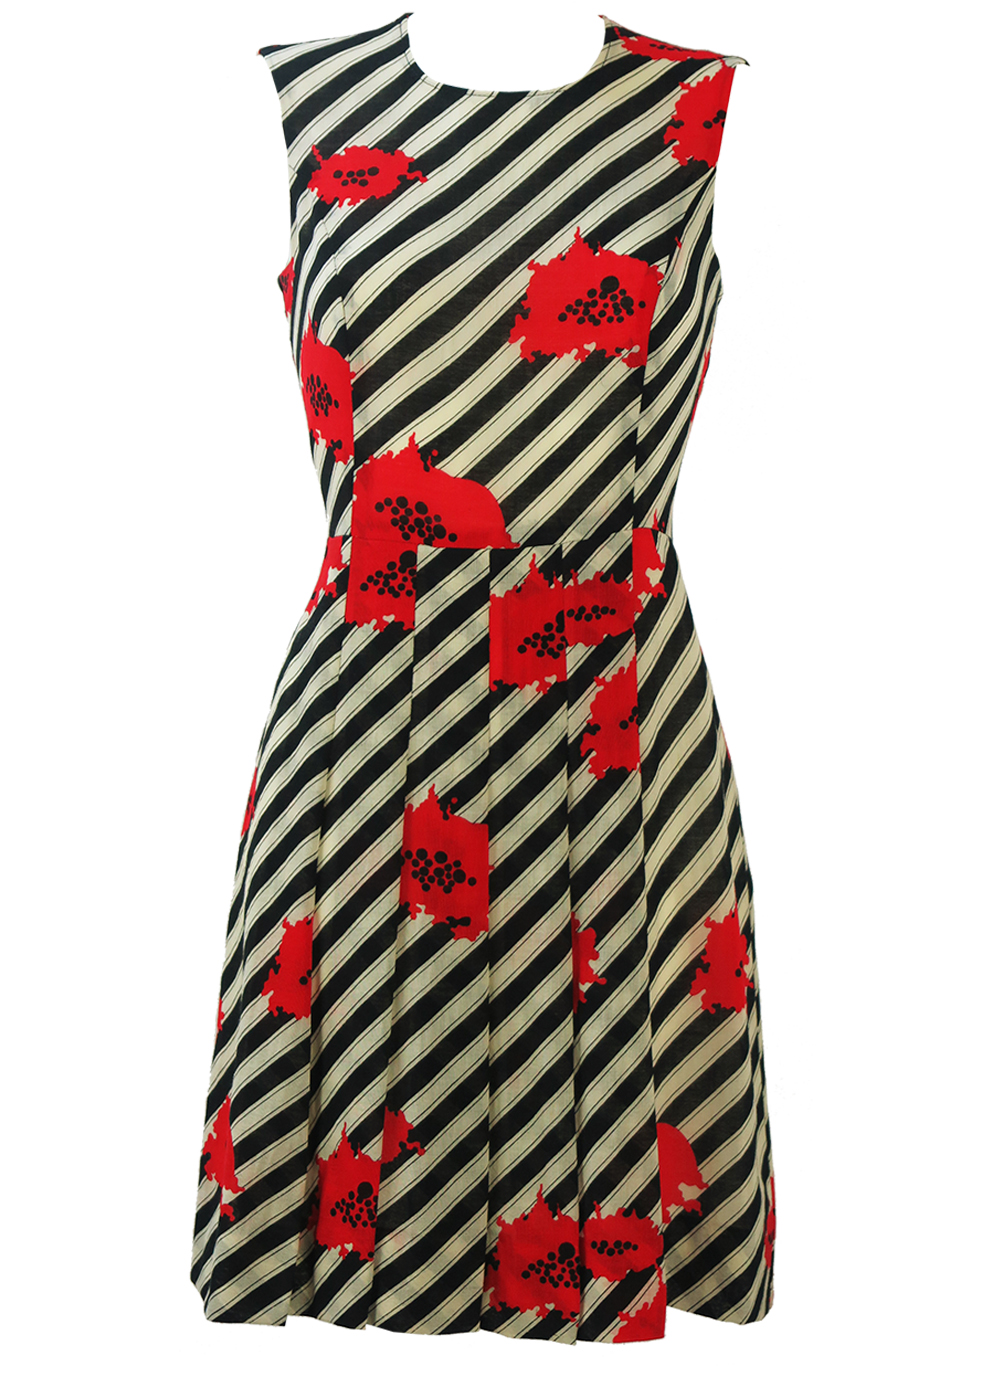 Vintage 60's Black & White Asymmetric Striped Dress with Abstract Poppy ...